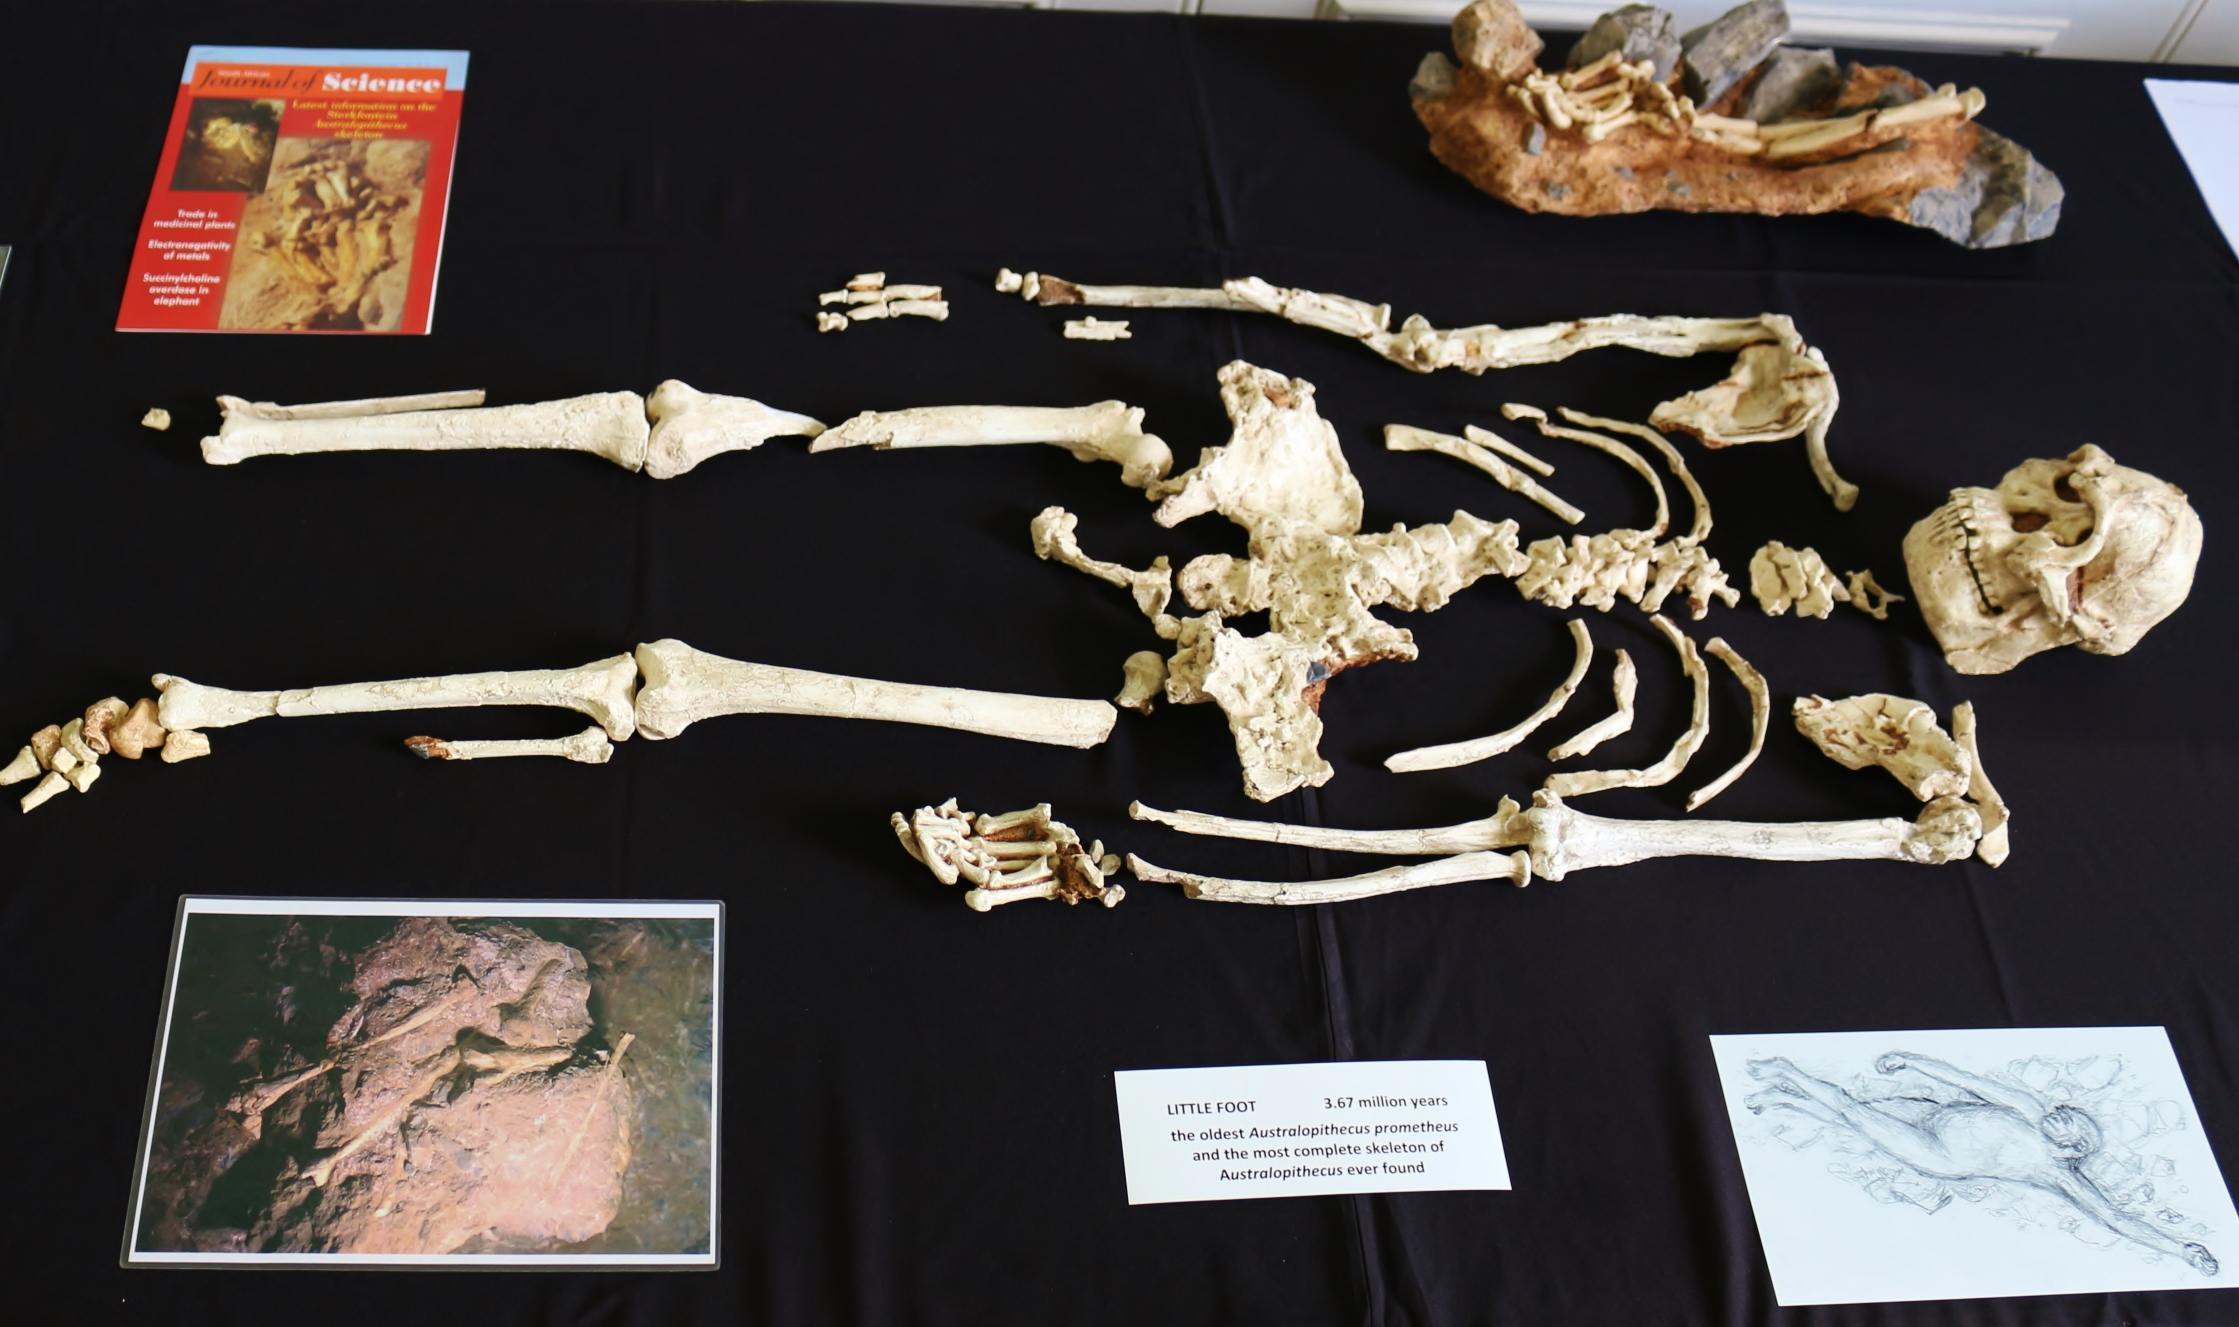 Little Foot: An intriguing 3.6 million years old human ancestor 2